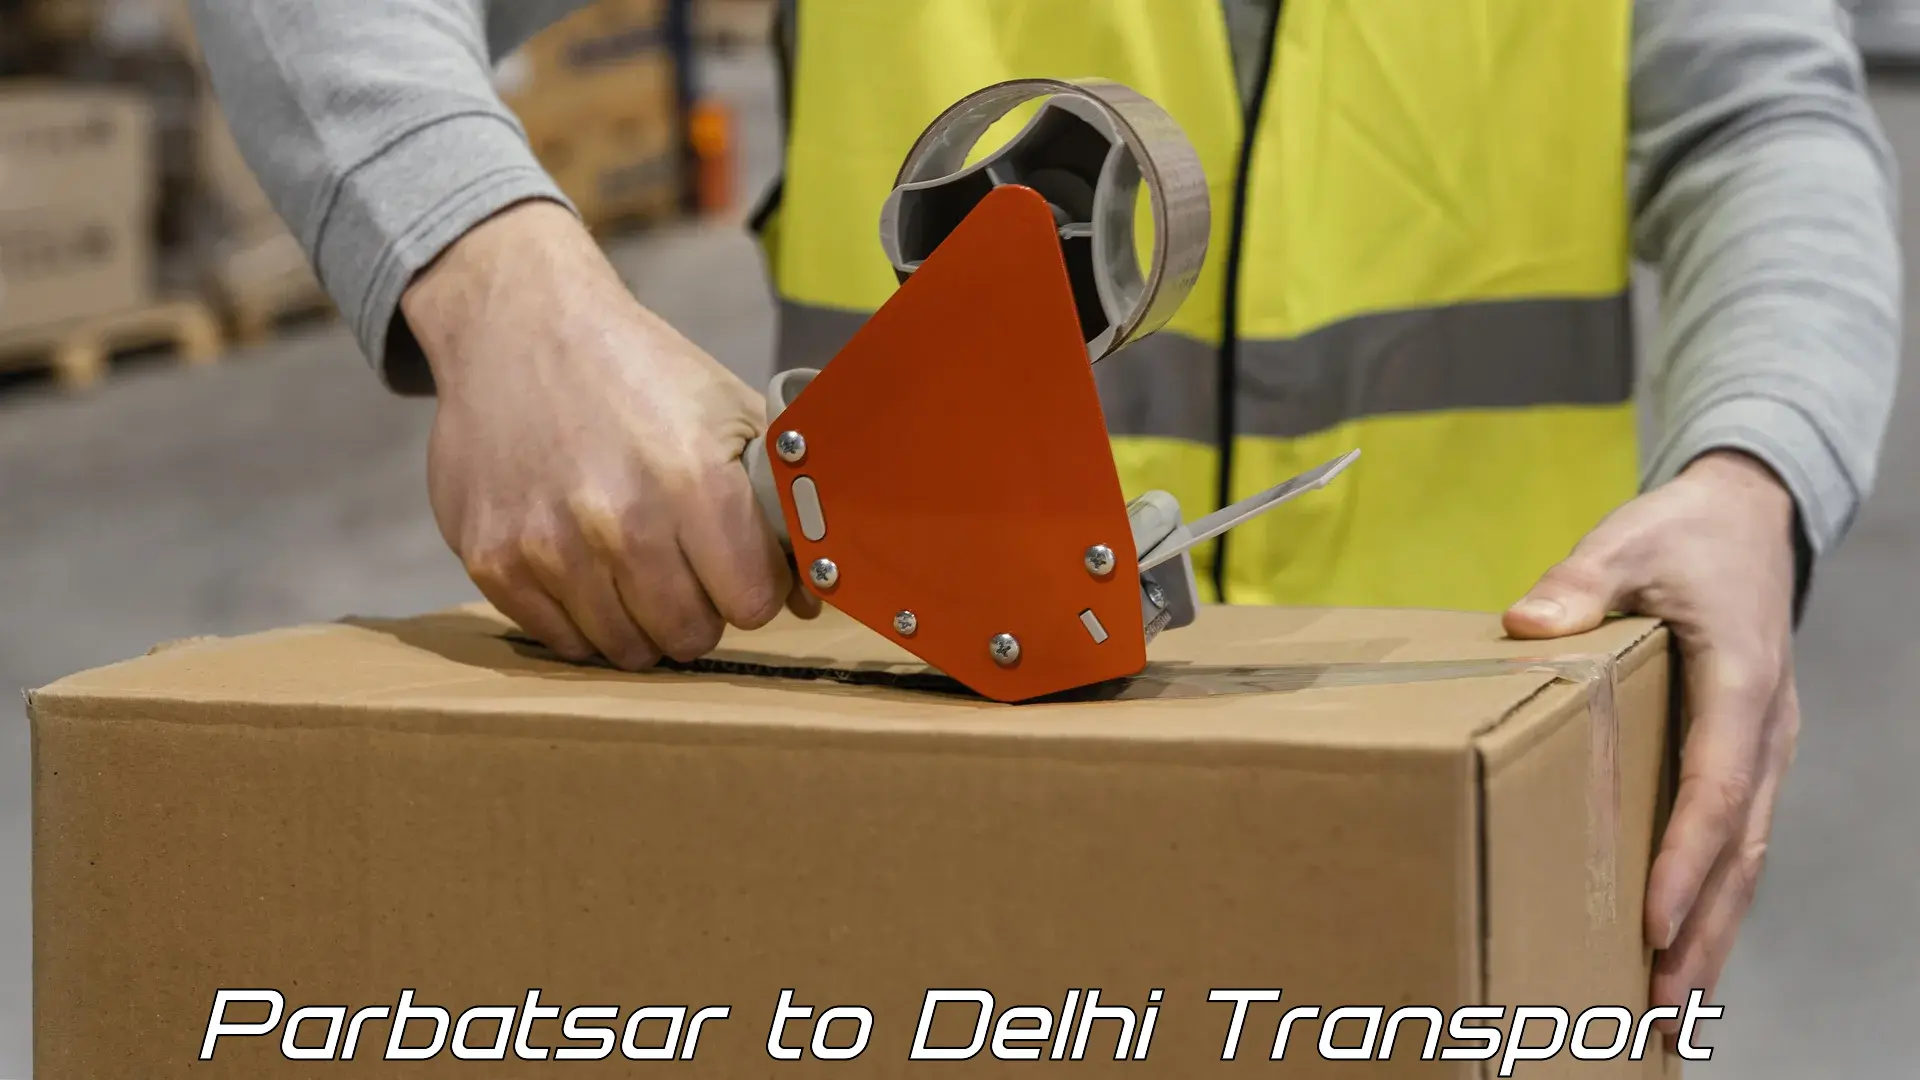 Transport bike from one state to another Parbatsar to NCR